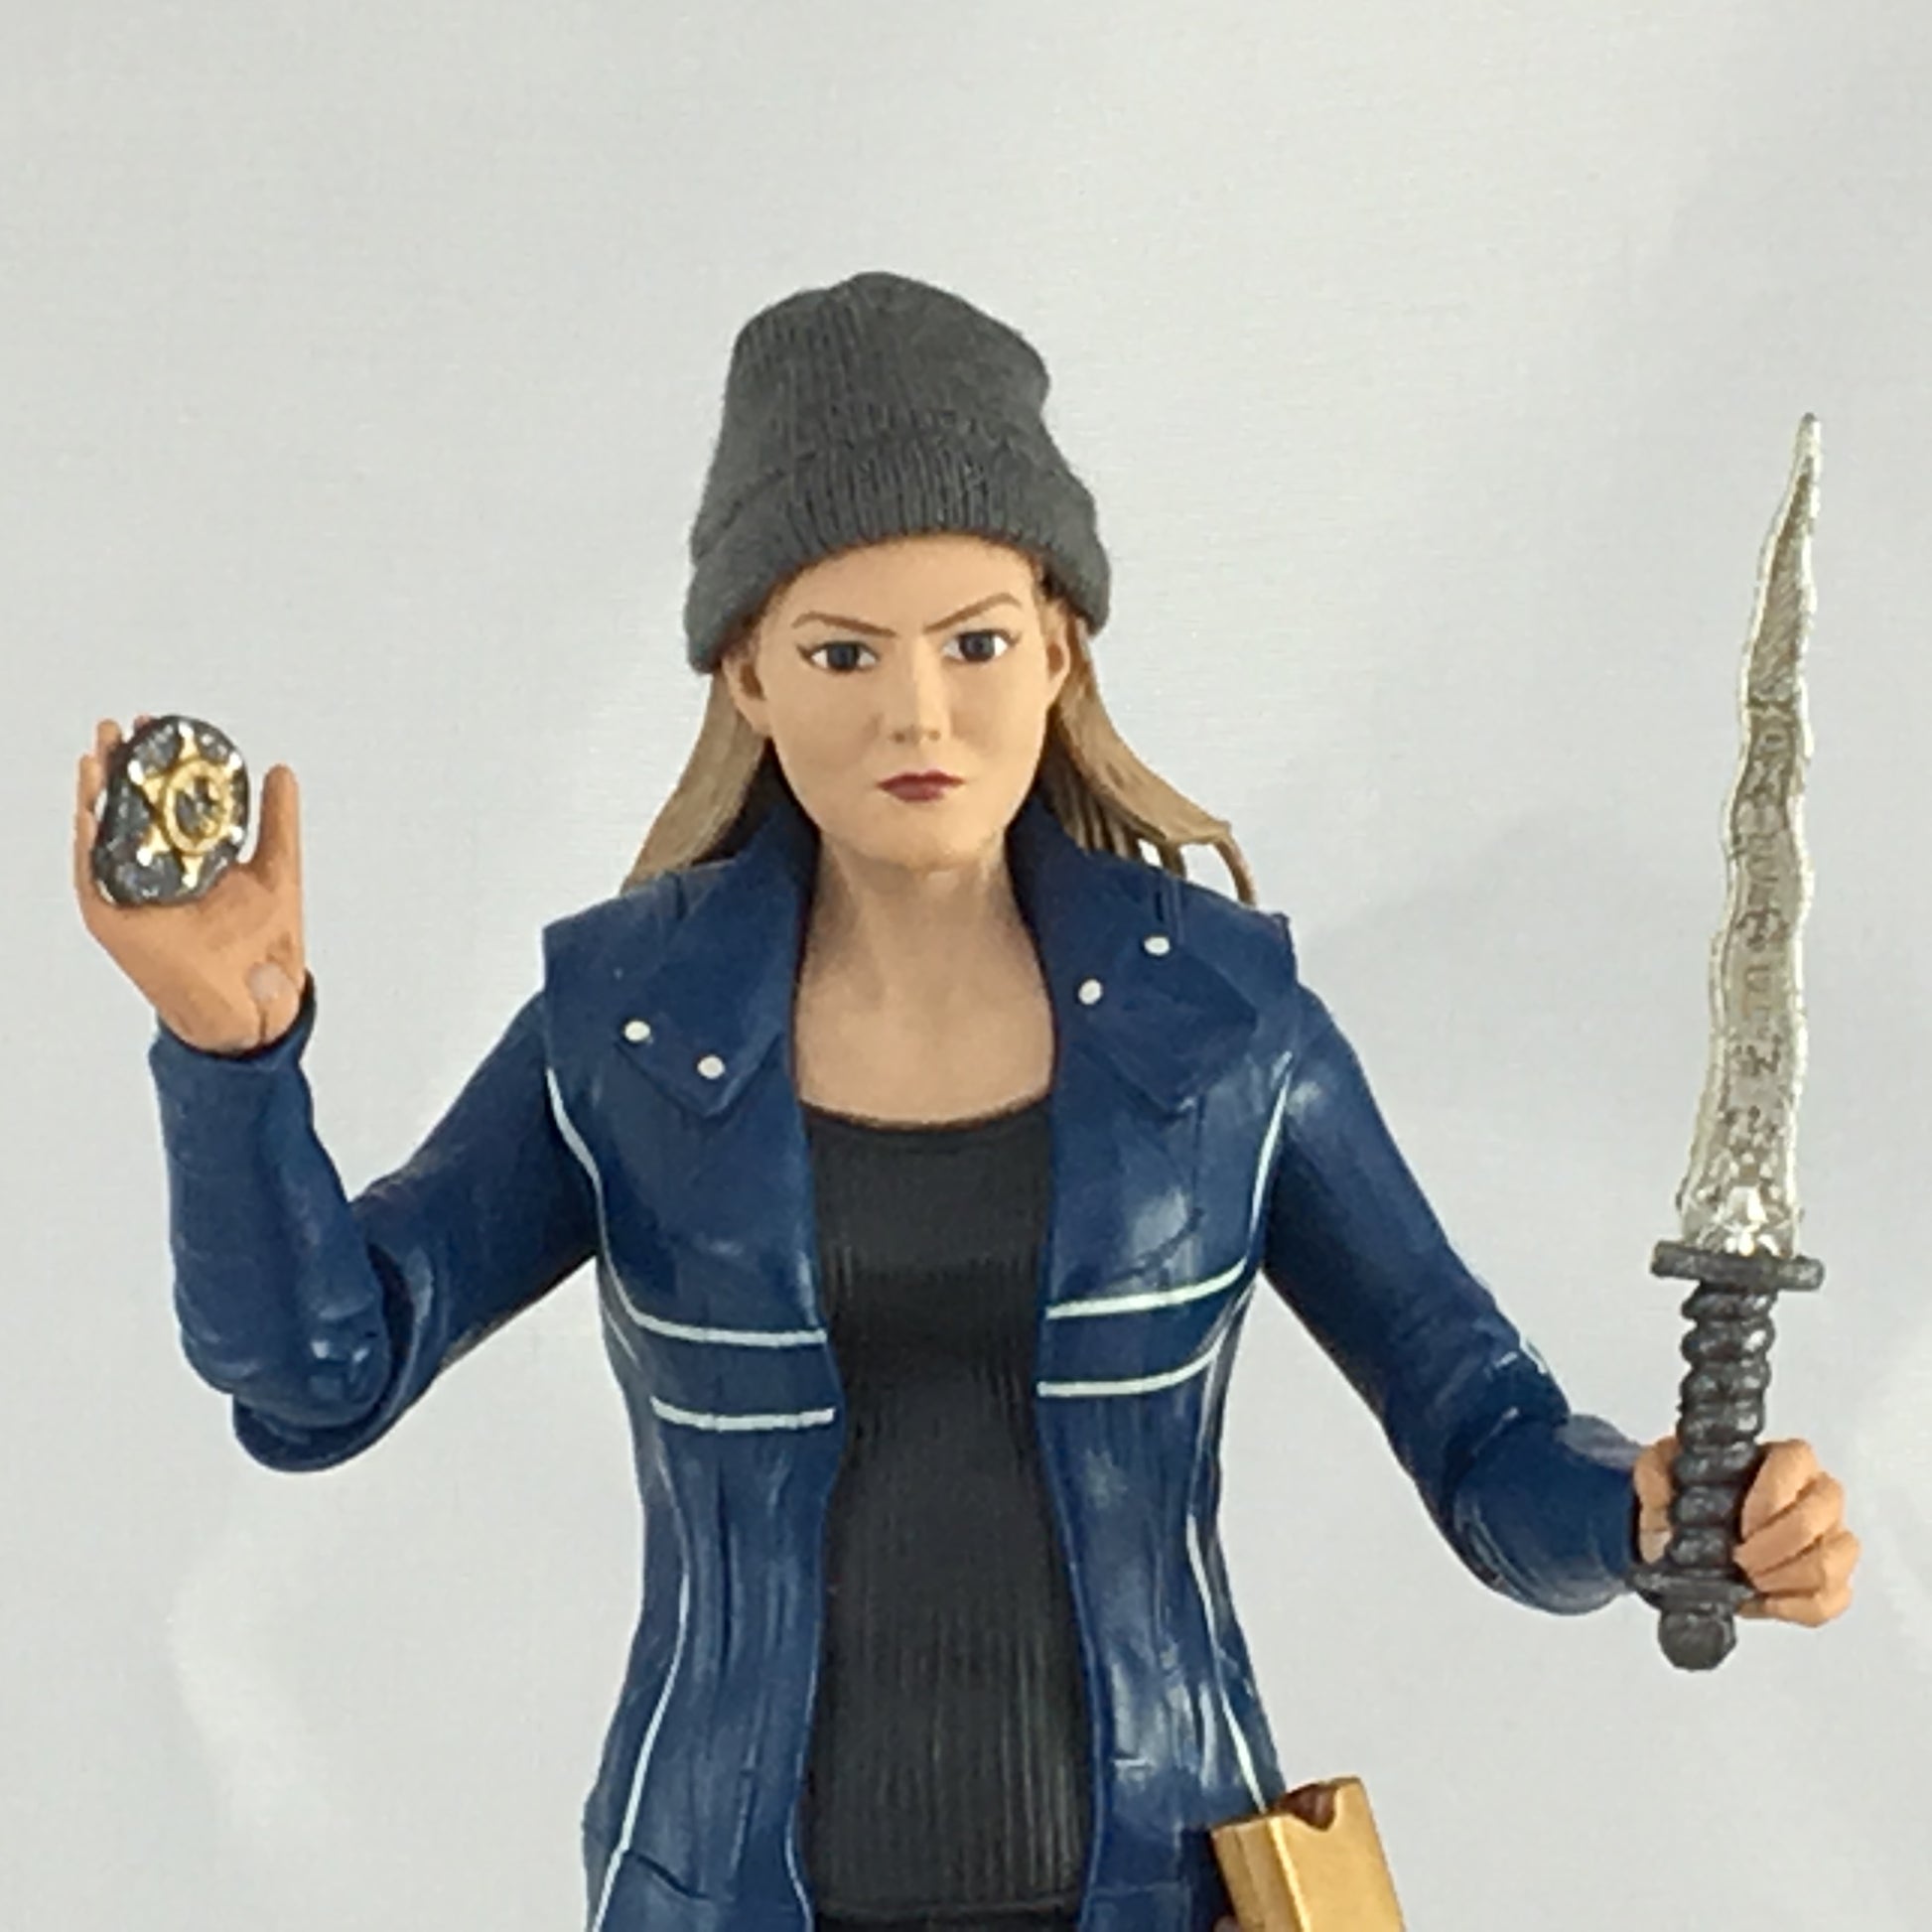 Once Upon a Time Emma Swan Blue Jacket Action Figure - San Diego Comic Con 2017 Exclusive - Icon Heroes 